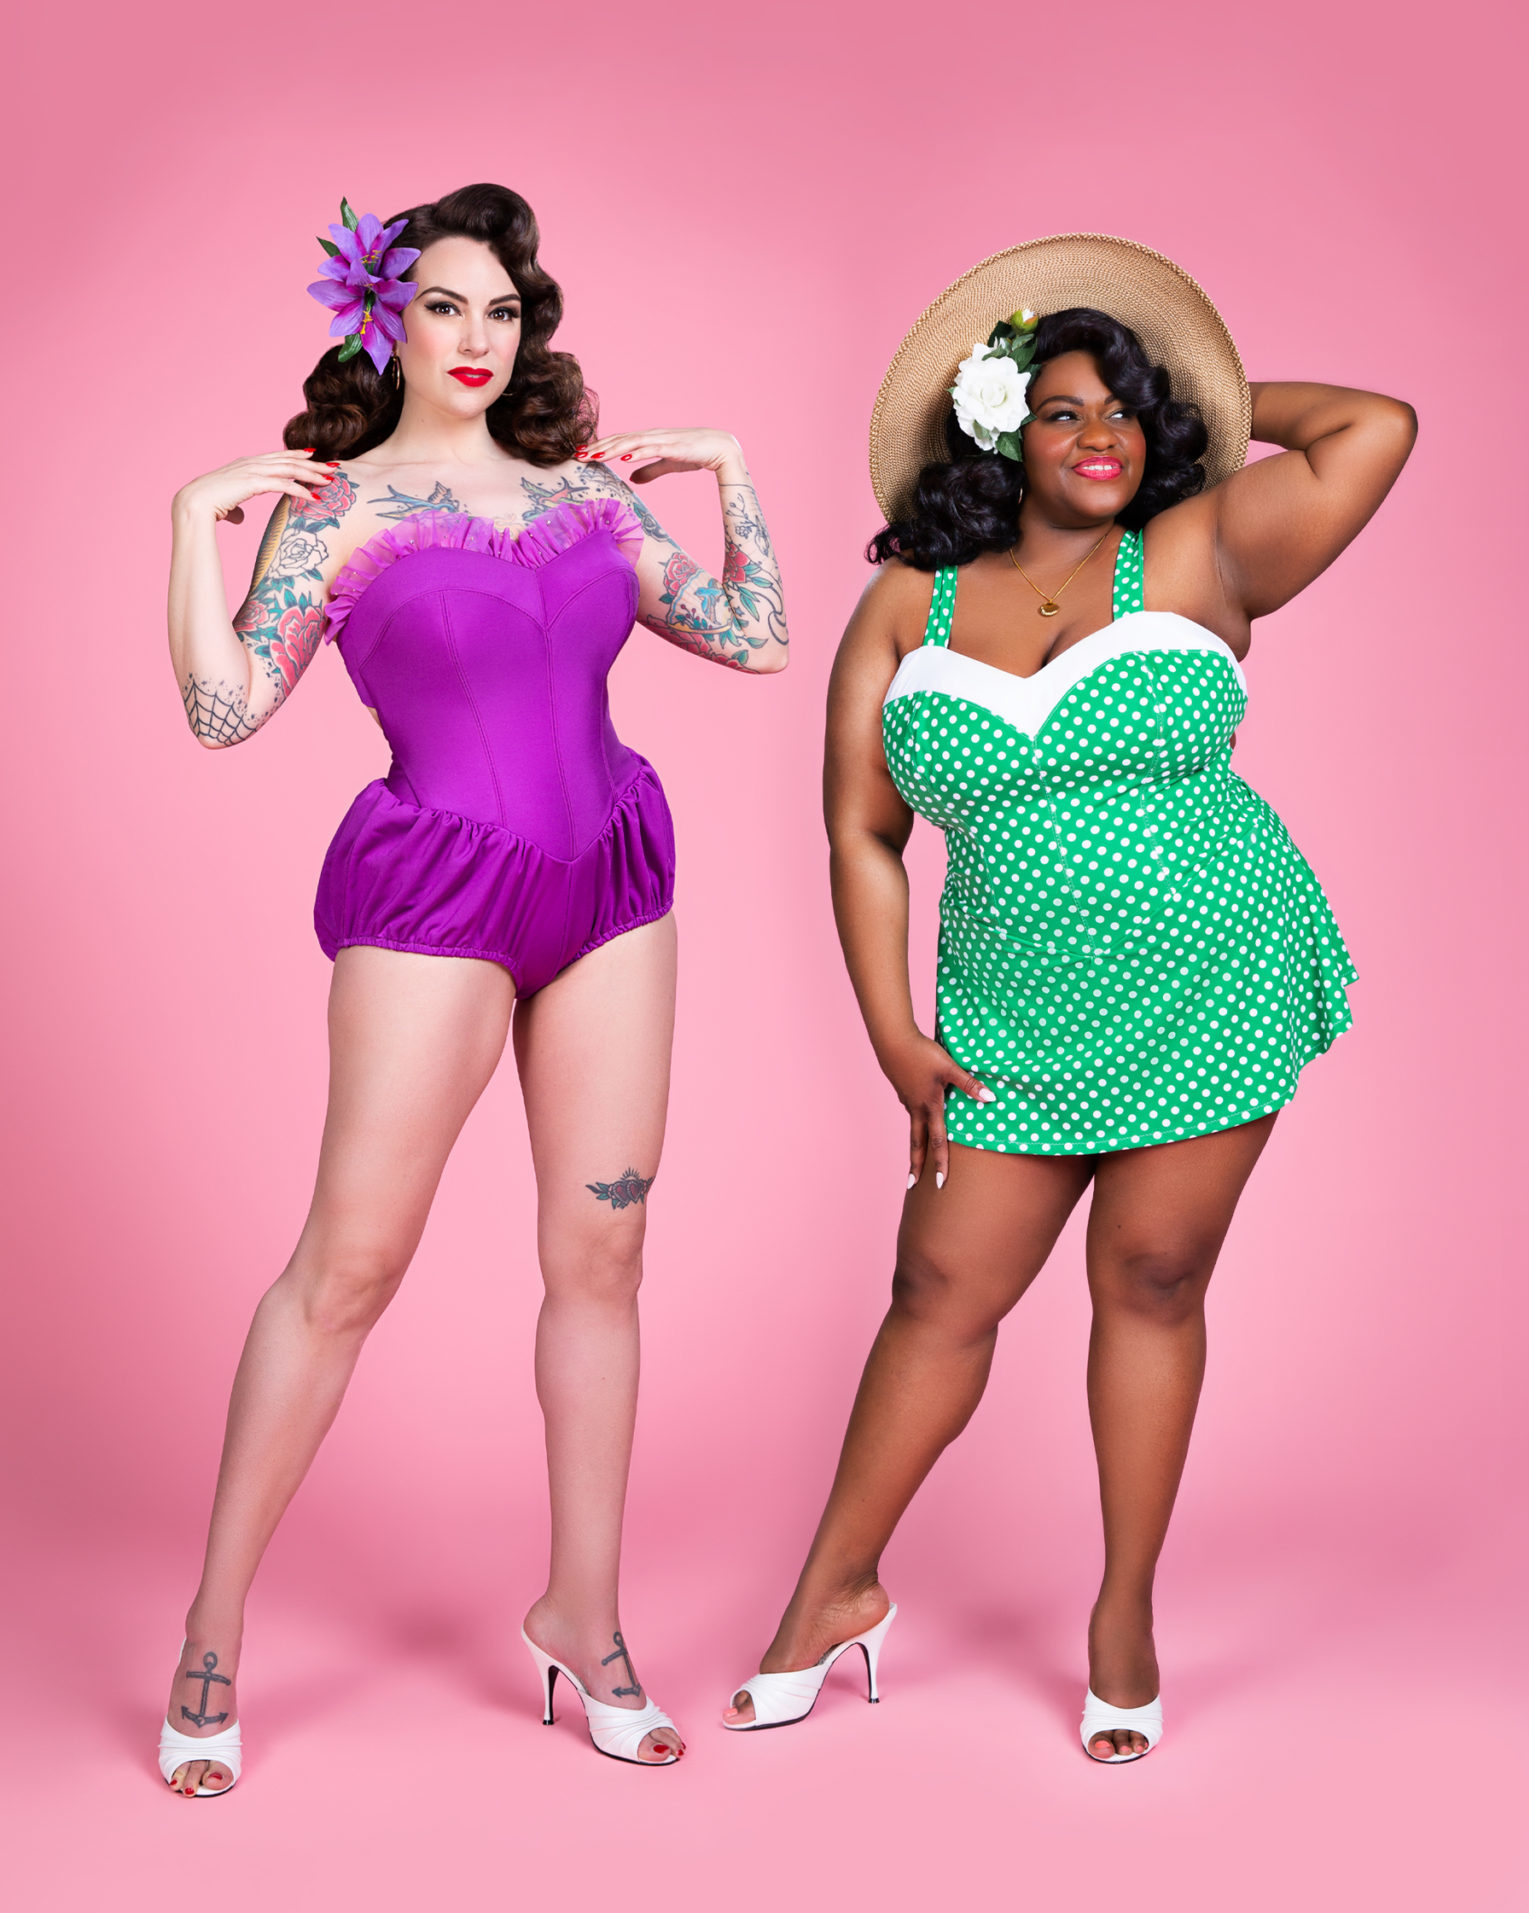 New Vintage Retro Swimsuits, Bathing Suits & Swimwear for Sale